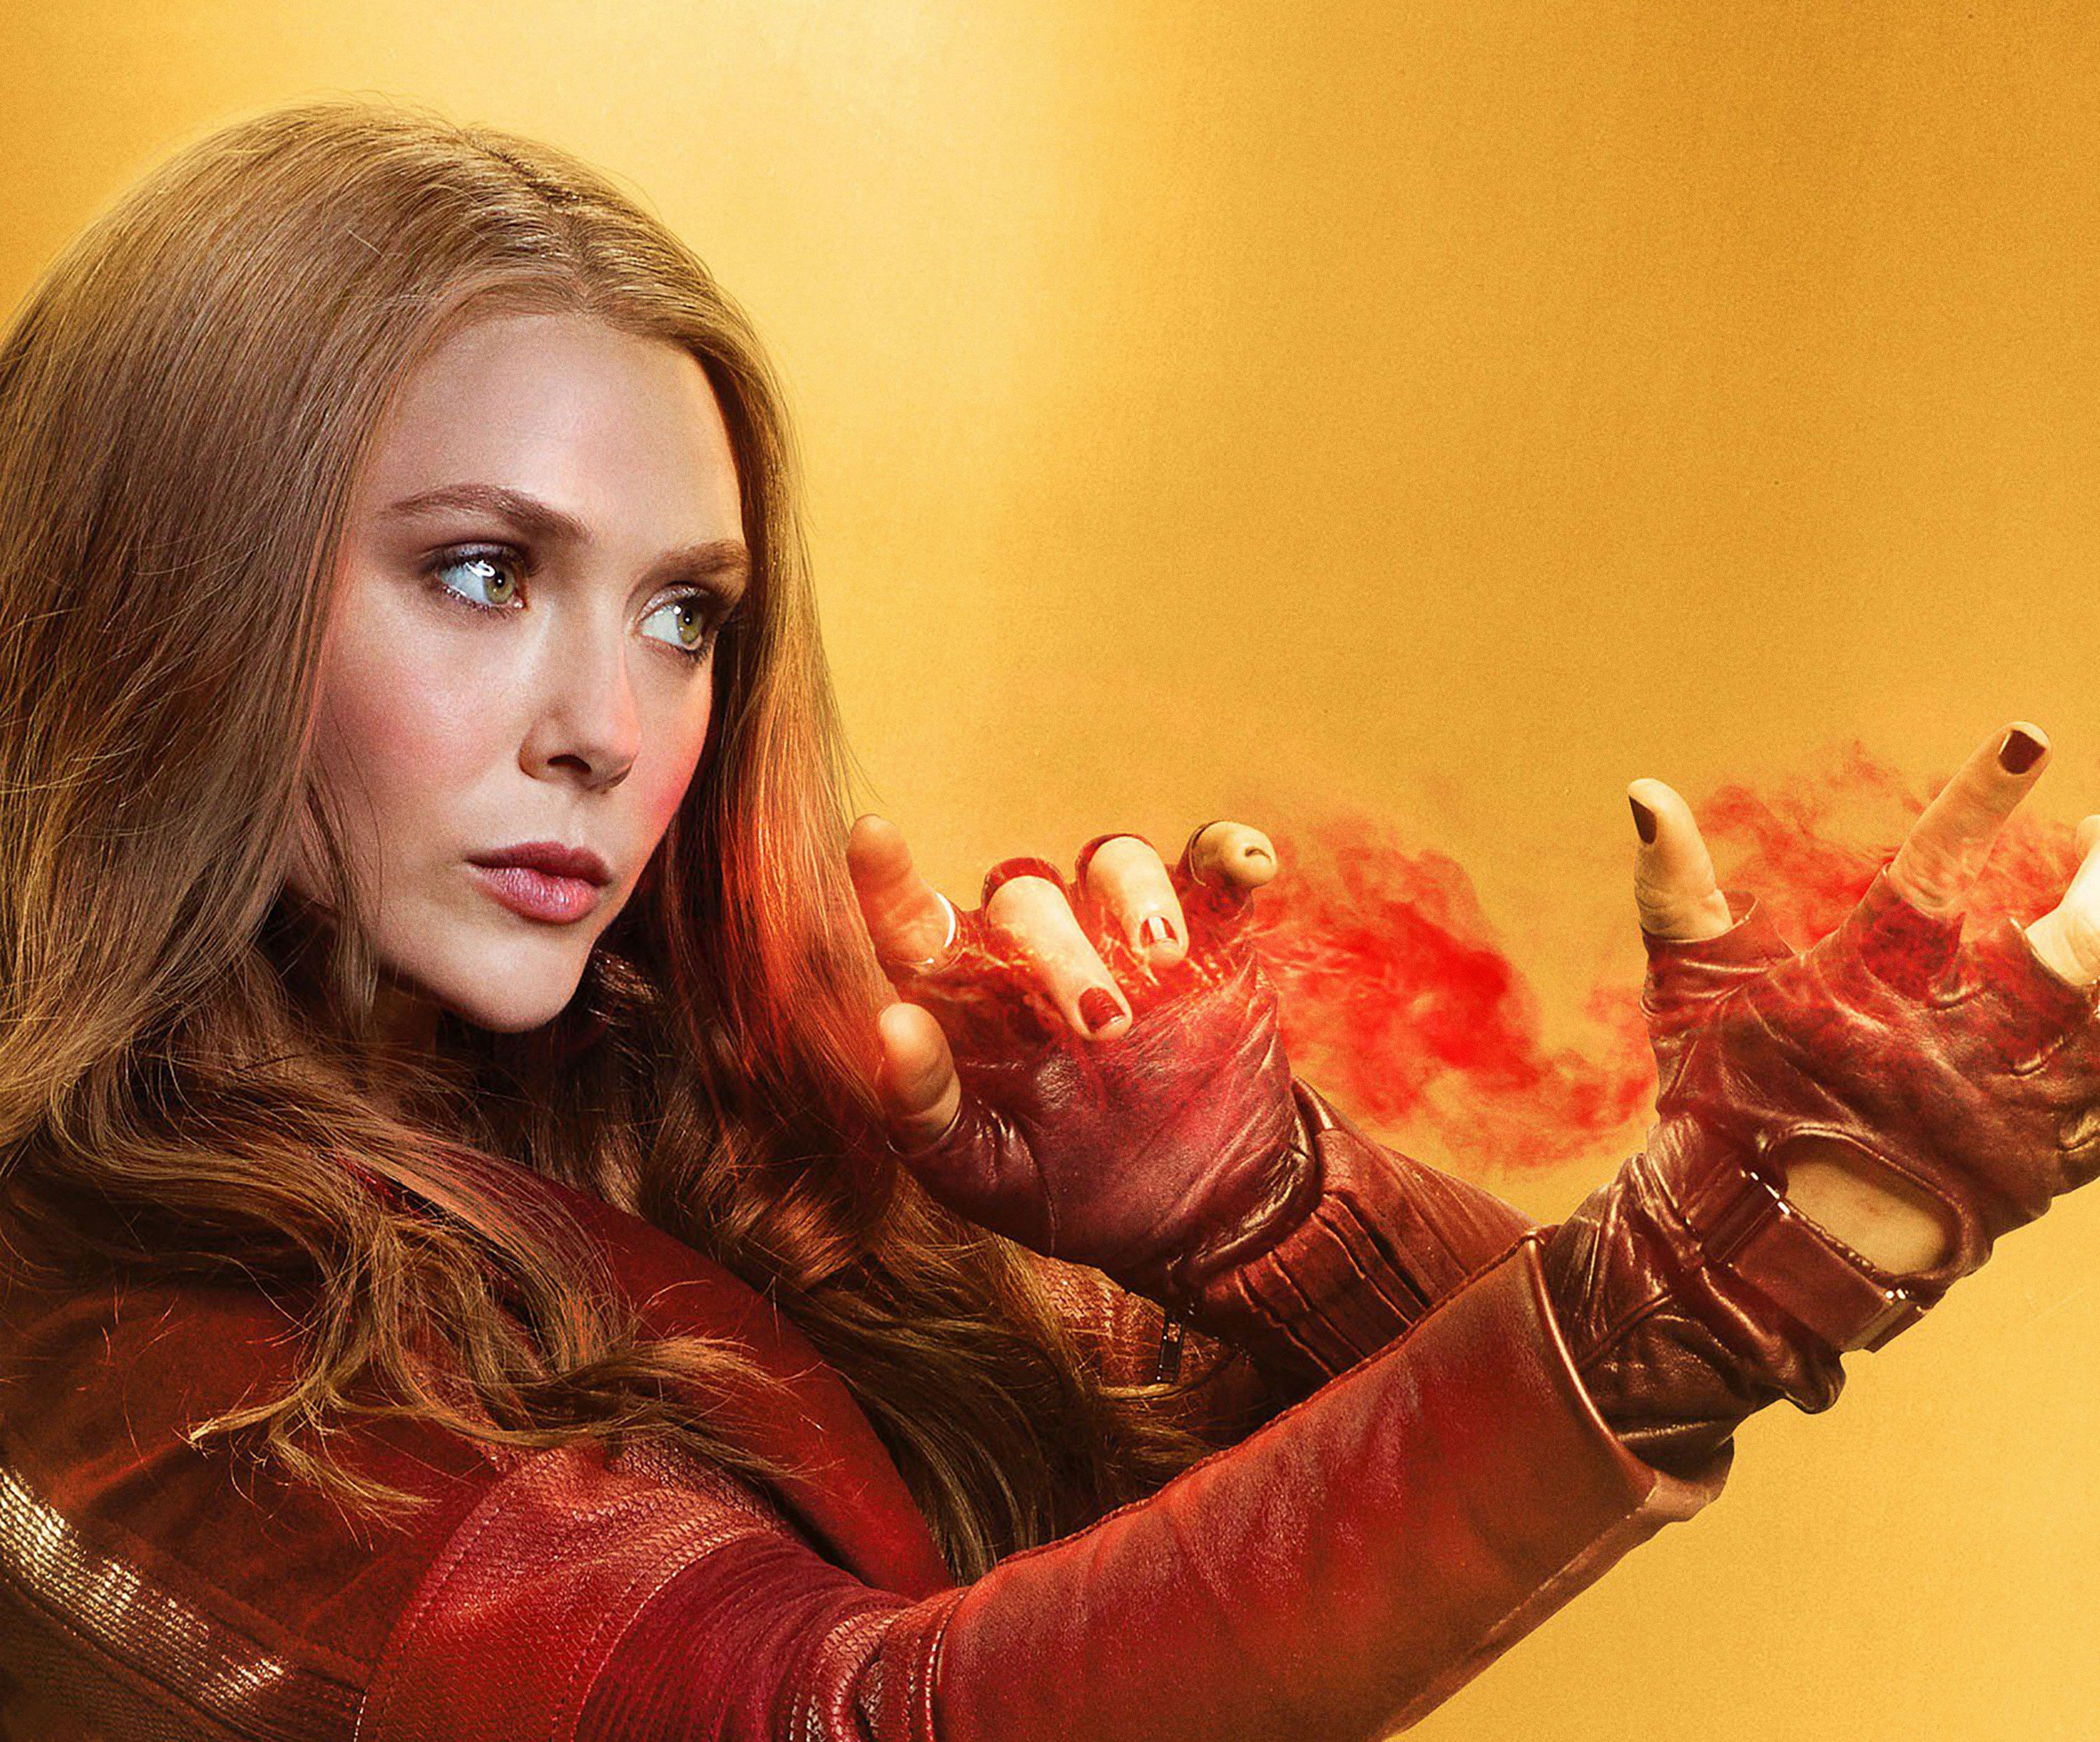 Wallpaper Scarlet Witch, Wanda Maximoff, Elizabeth Olsen, Marvel Comics, Movies / Editor's Picks,. Wallpaper for iPhone, Android, Mobile and Desktop